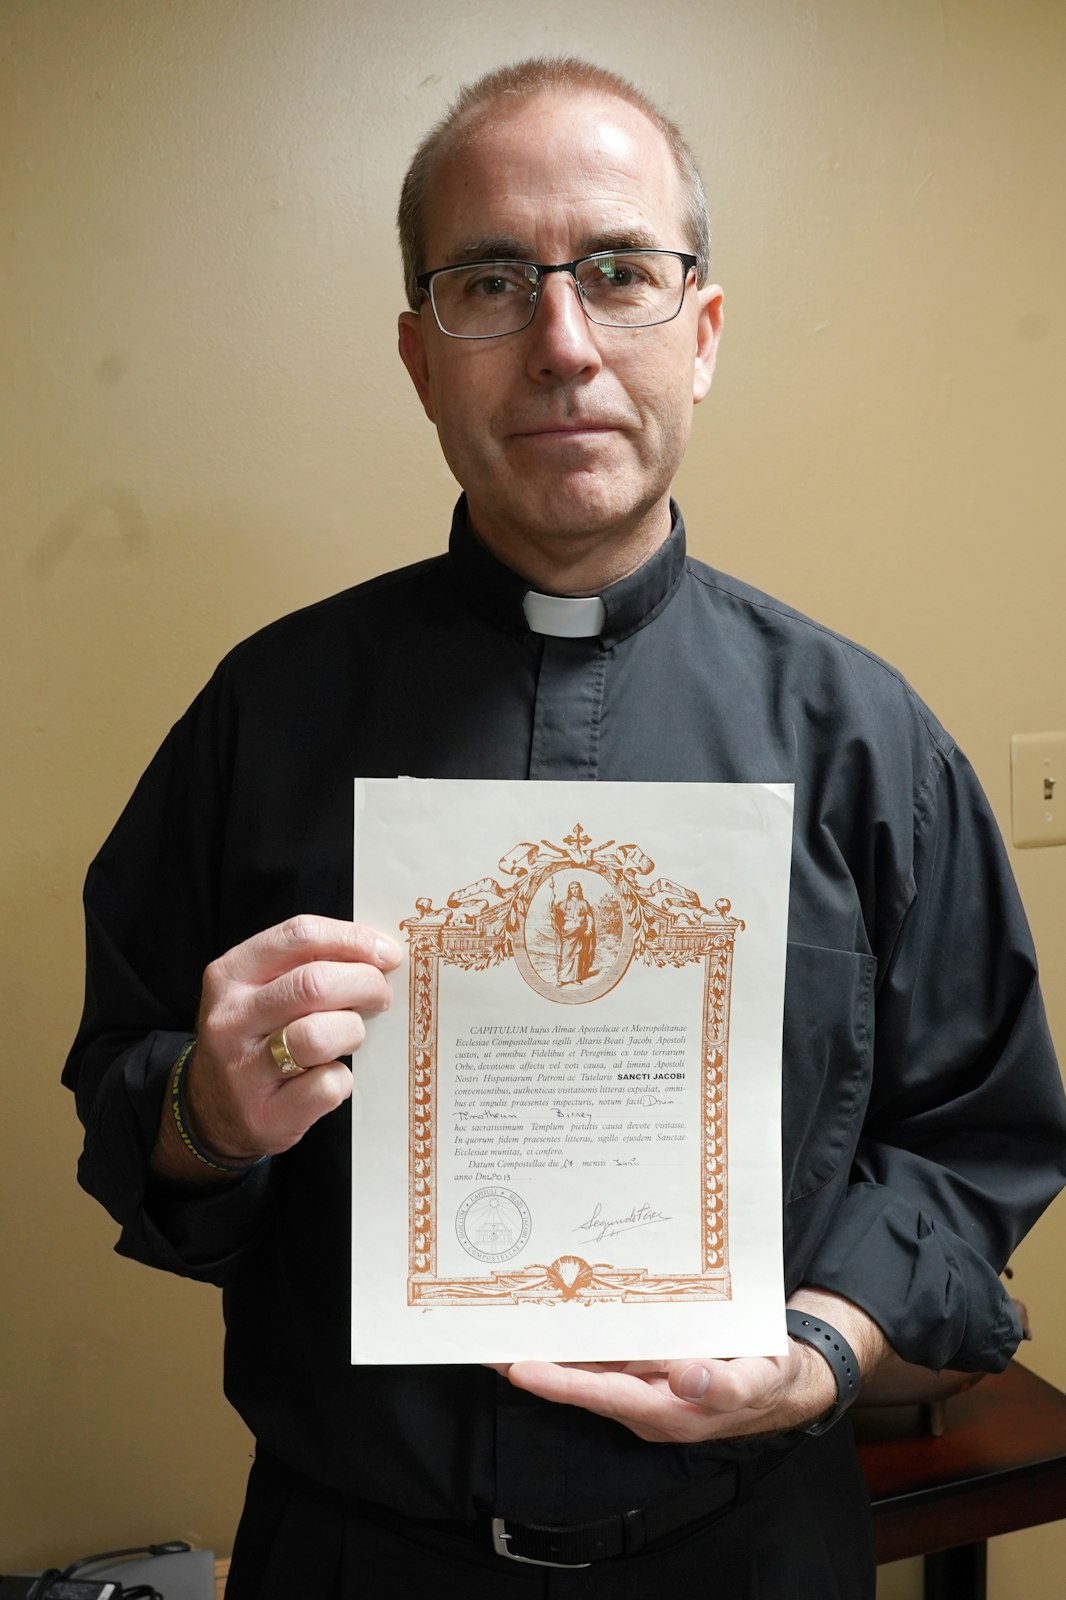 Fr. Tim Birney holds up his El Camino Compostela for completing the Camino de Santiago. After each Camino, the pilgrims gets to determine if they made the journey for spiritual or recreational reasons. Fr. Birney estimates its about  50-50 split between the two. (Photo by Daniel Meloy | Detroit Catholic)